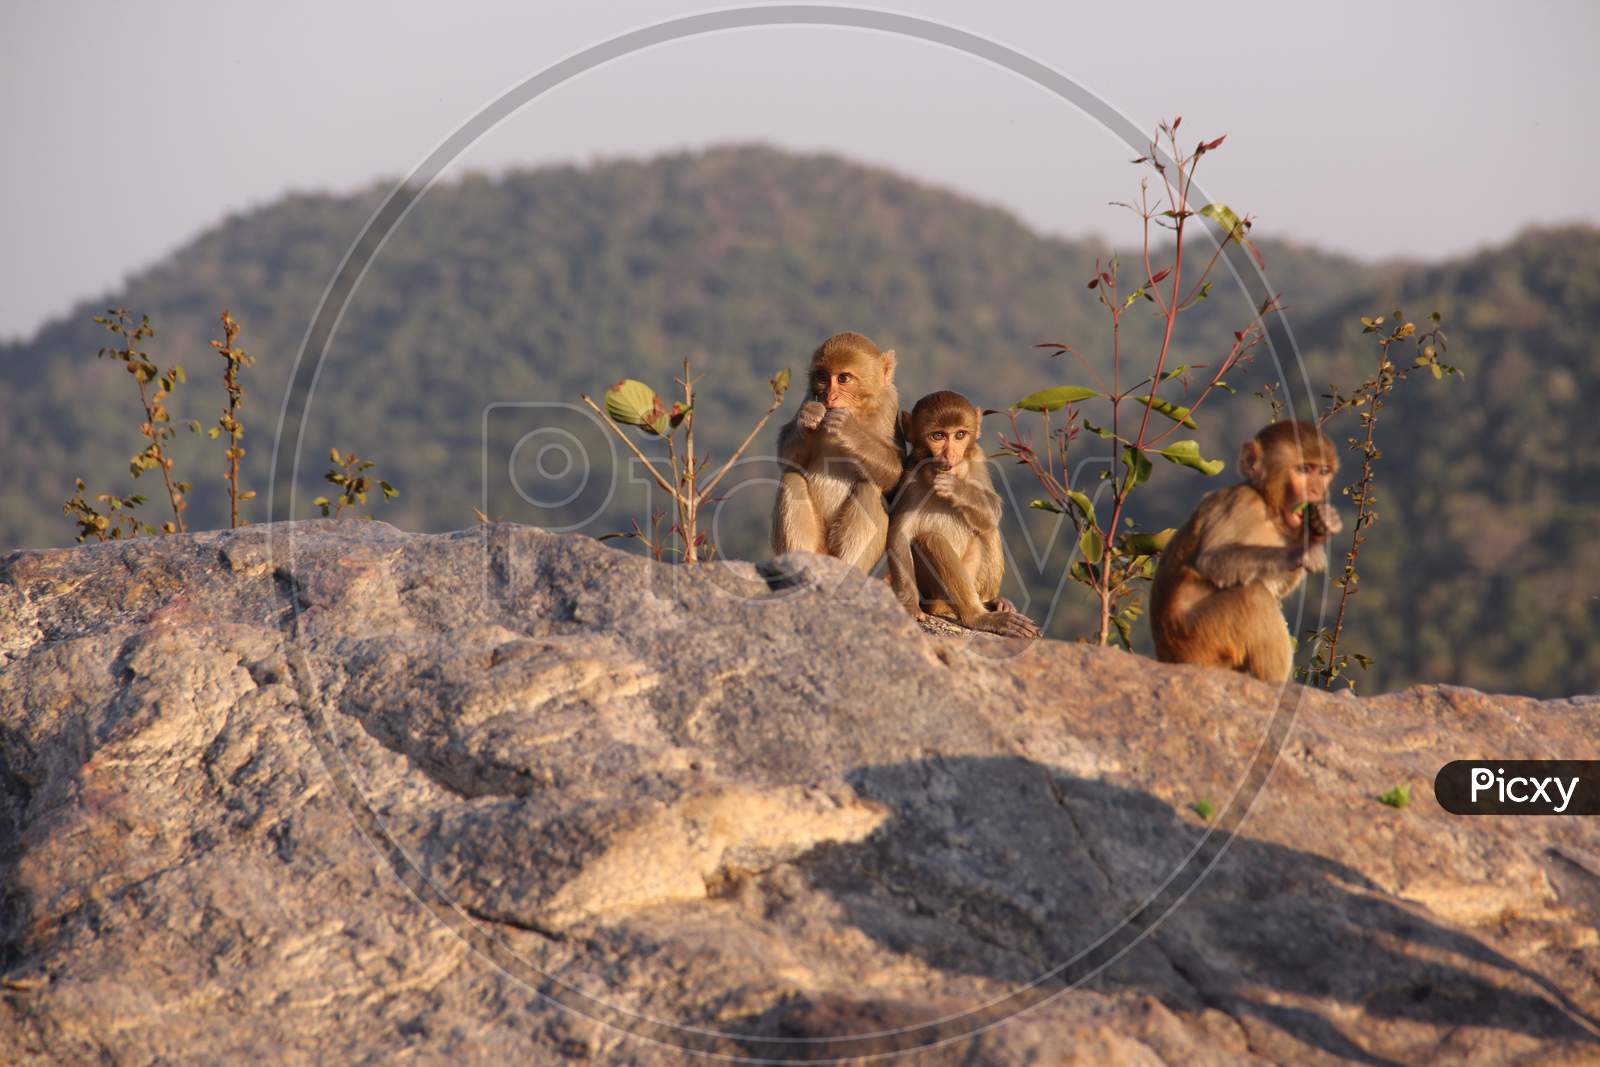 Later in the afternoon, baby monkeys are playing on the top of the hill at hundru waterfalls Ranchi Jharkhand in India